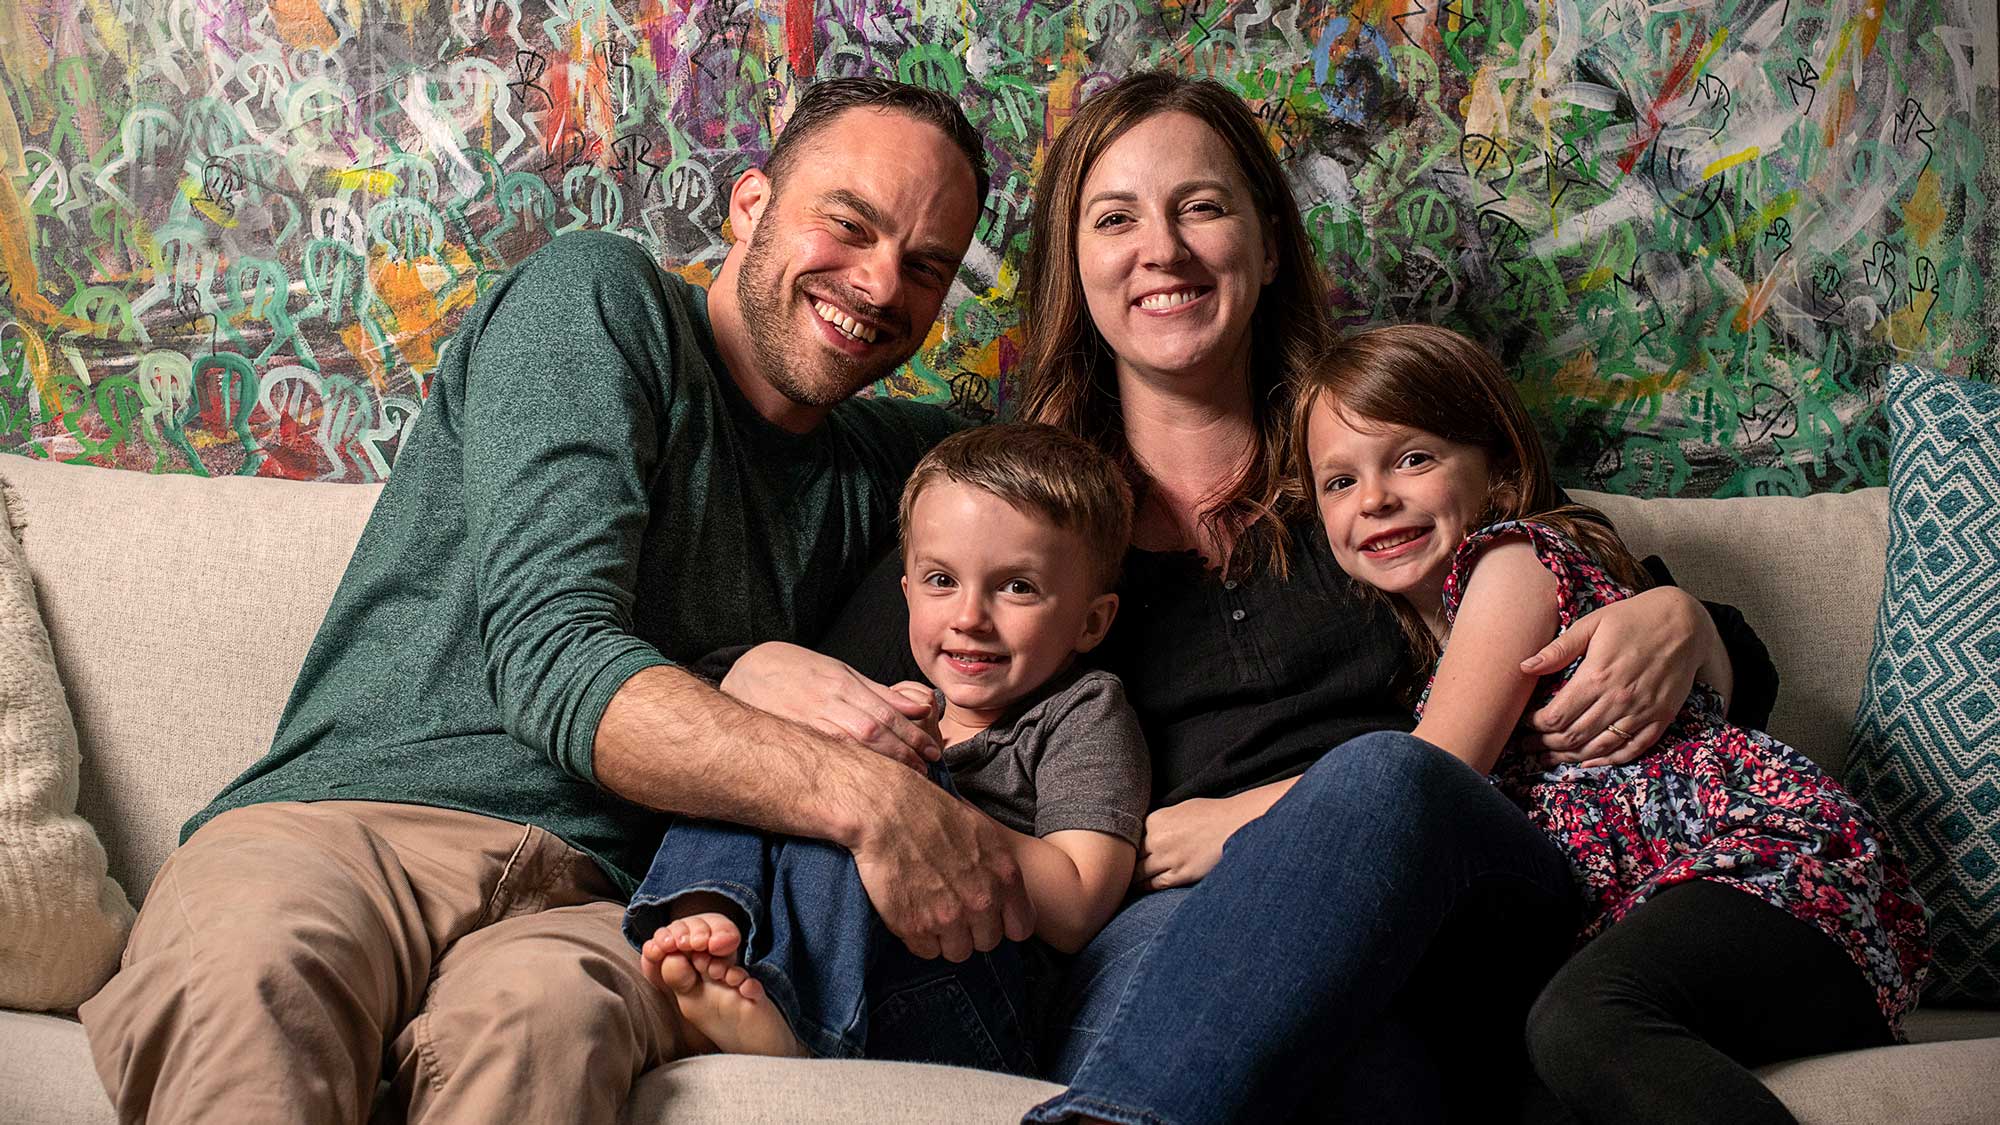 AJ Heckman with his wife and their two children